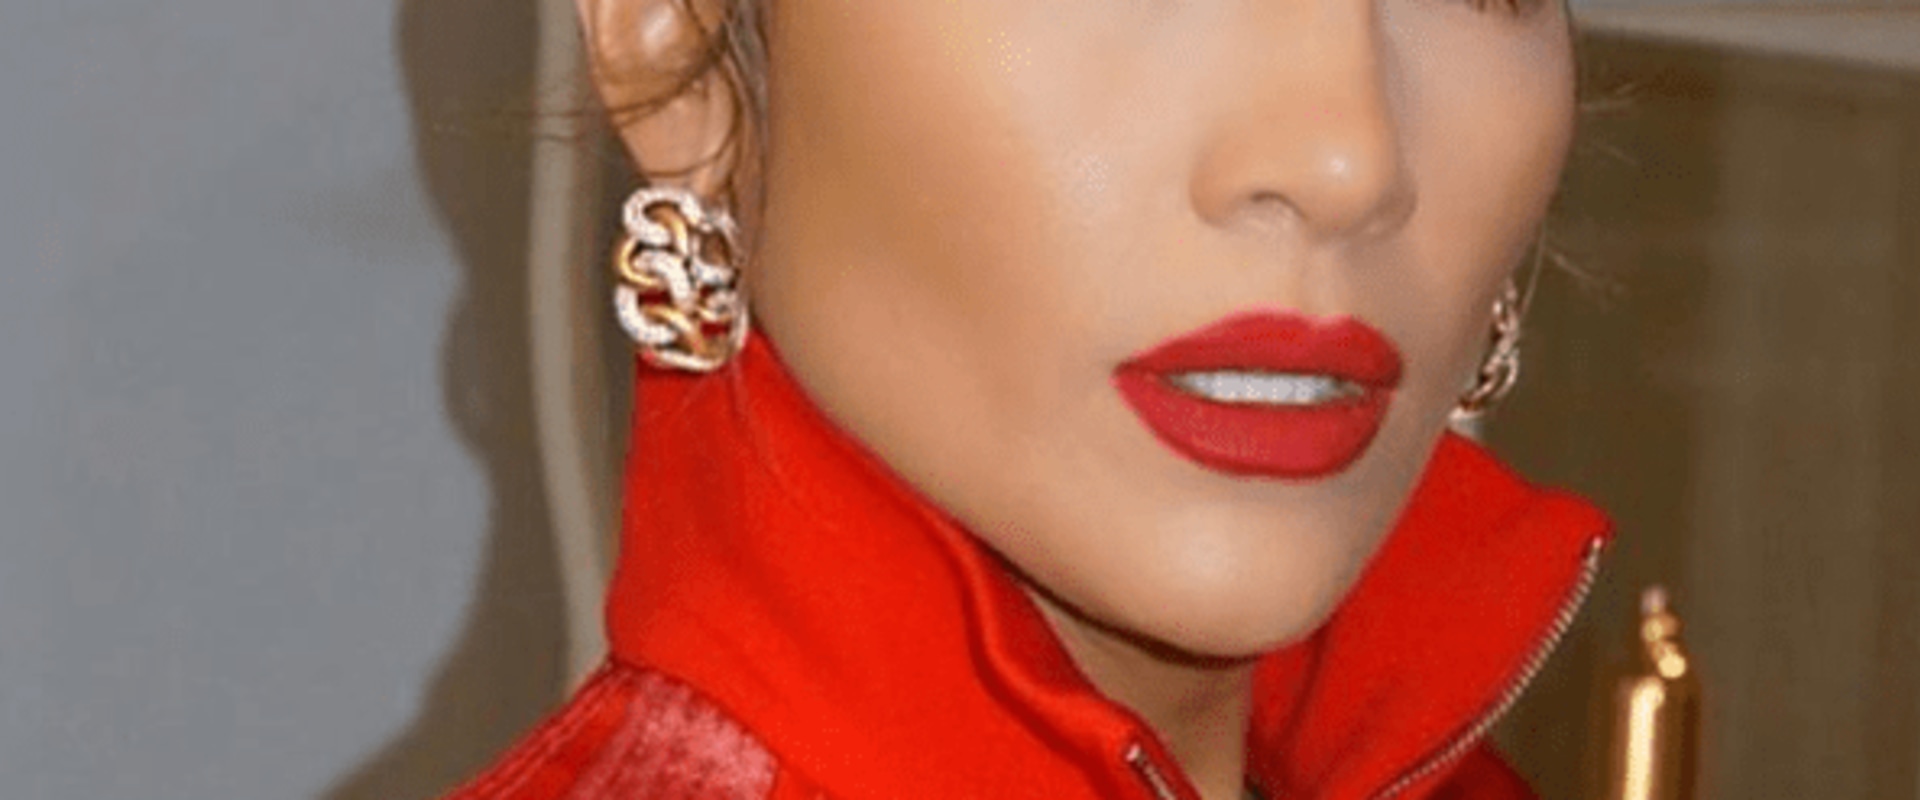 How to Get JLo's Flirty Lashes and Other Celebrity Eyelash Tips